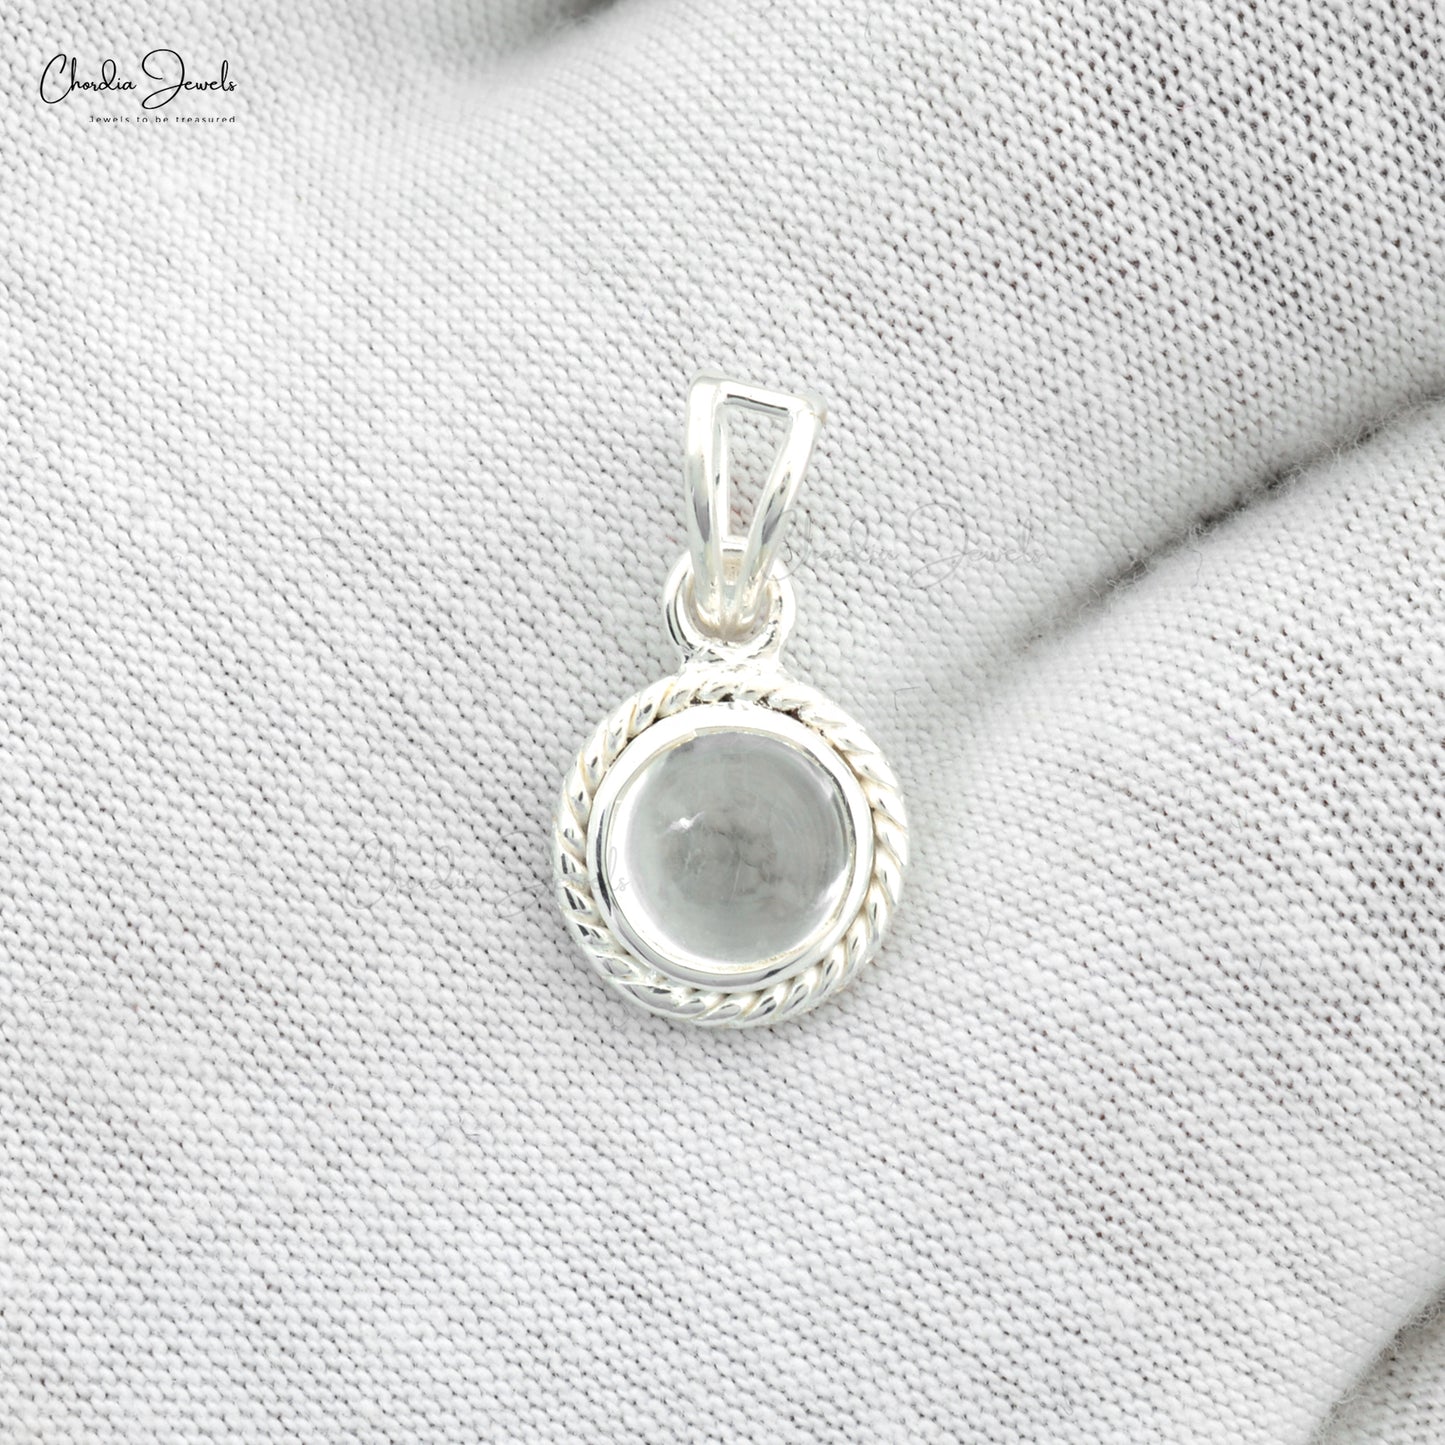 Genuine White Topaz Gemstone Pendant 925 Sterling Silver Pendant Necklace For Women Handmade Gemstone Jewelry At Discount Price